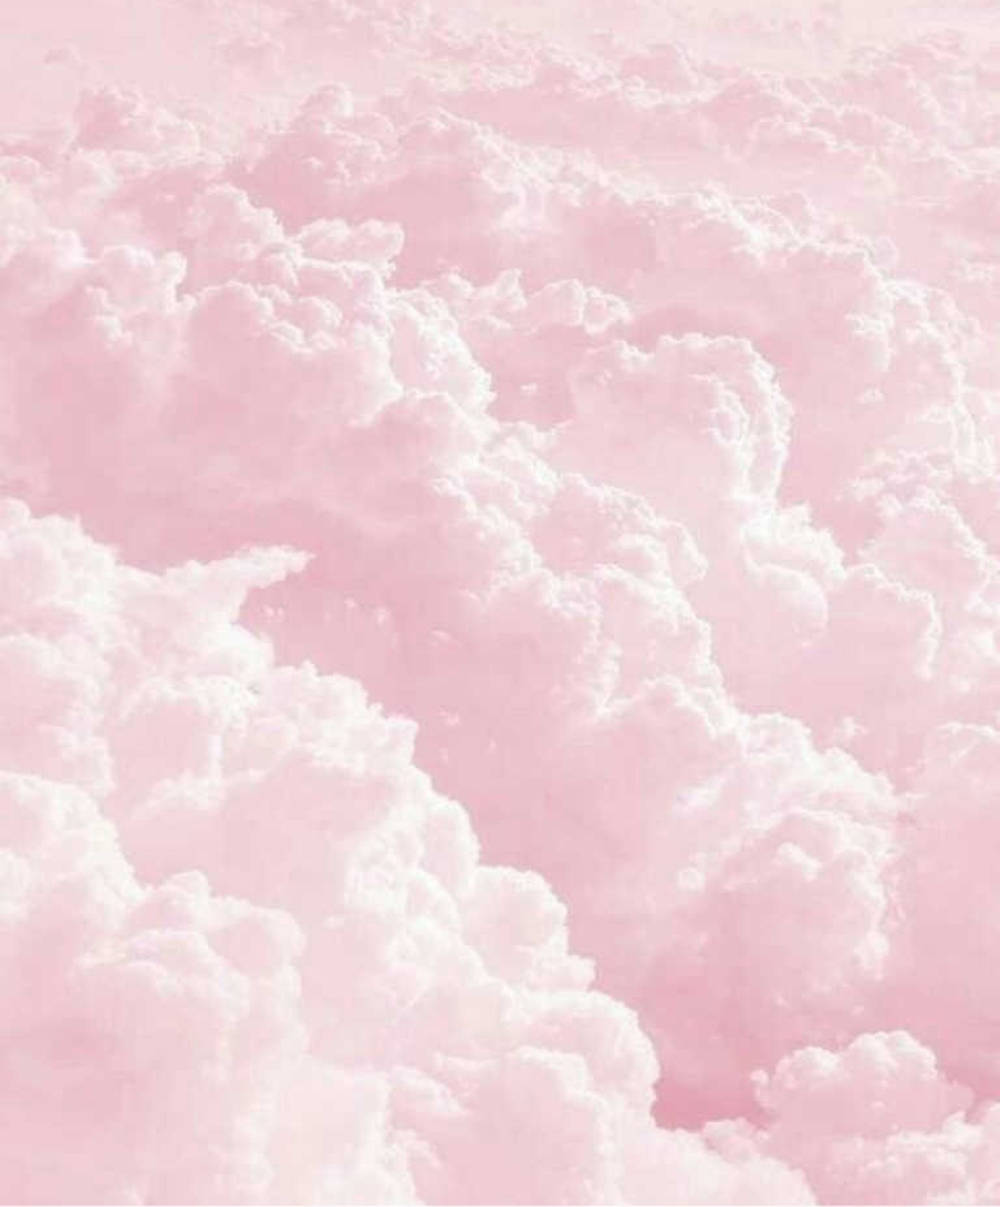 Dreamy Pastel Ipad Wallpaper With Thick Pink Clouds Background